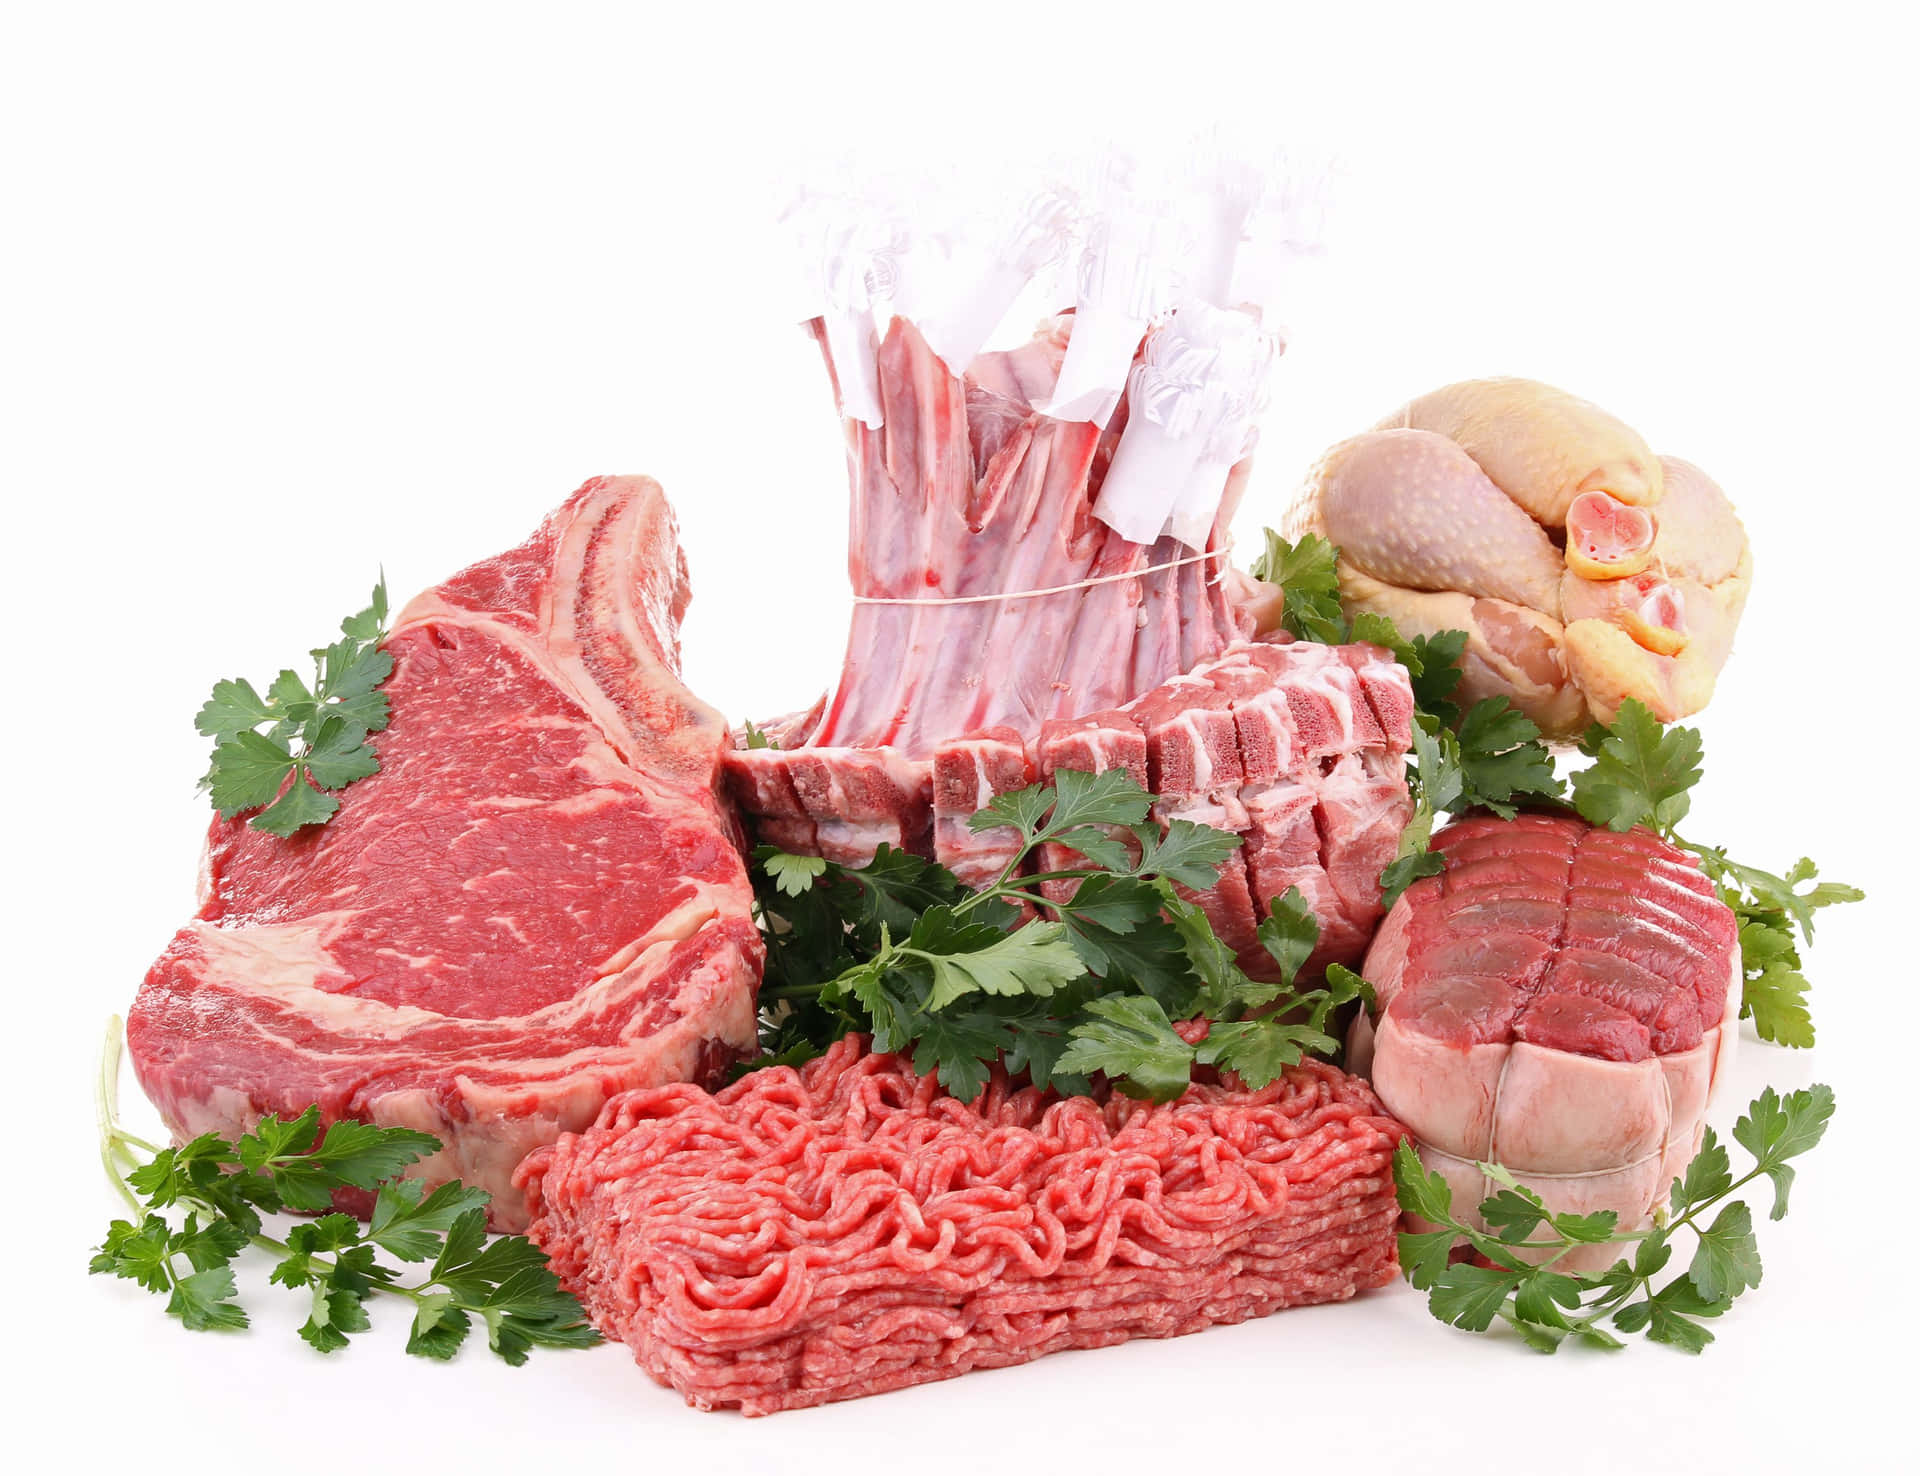 A Variety Of Meats And Vegetables Are Arranged On A White Background